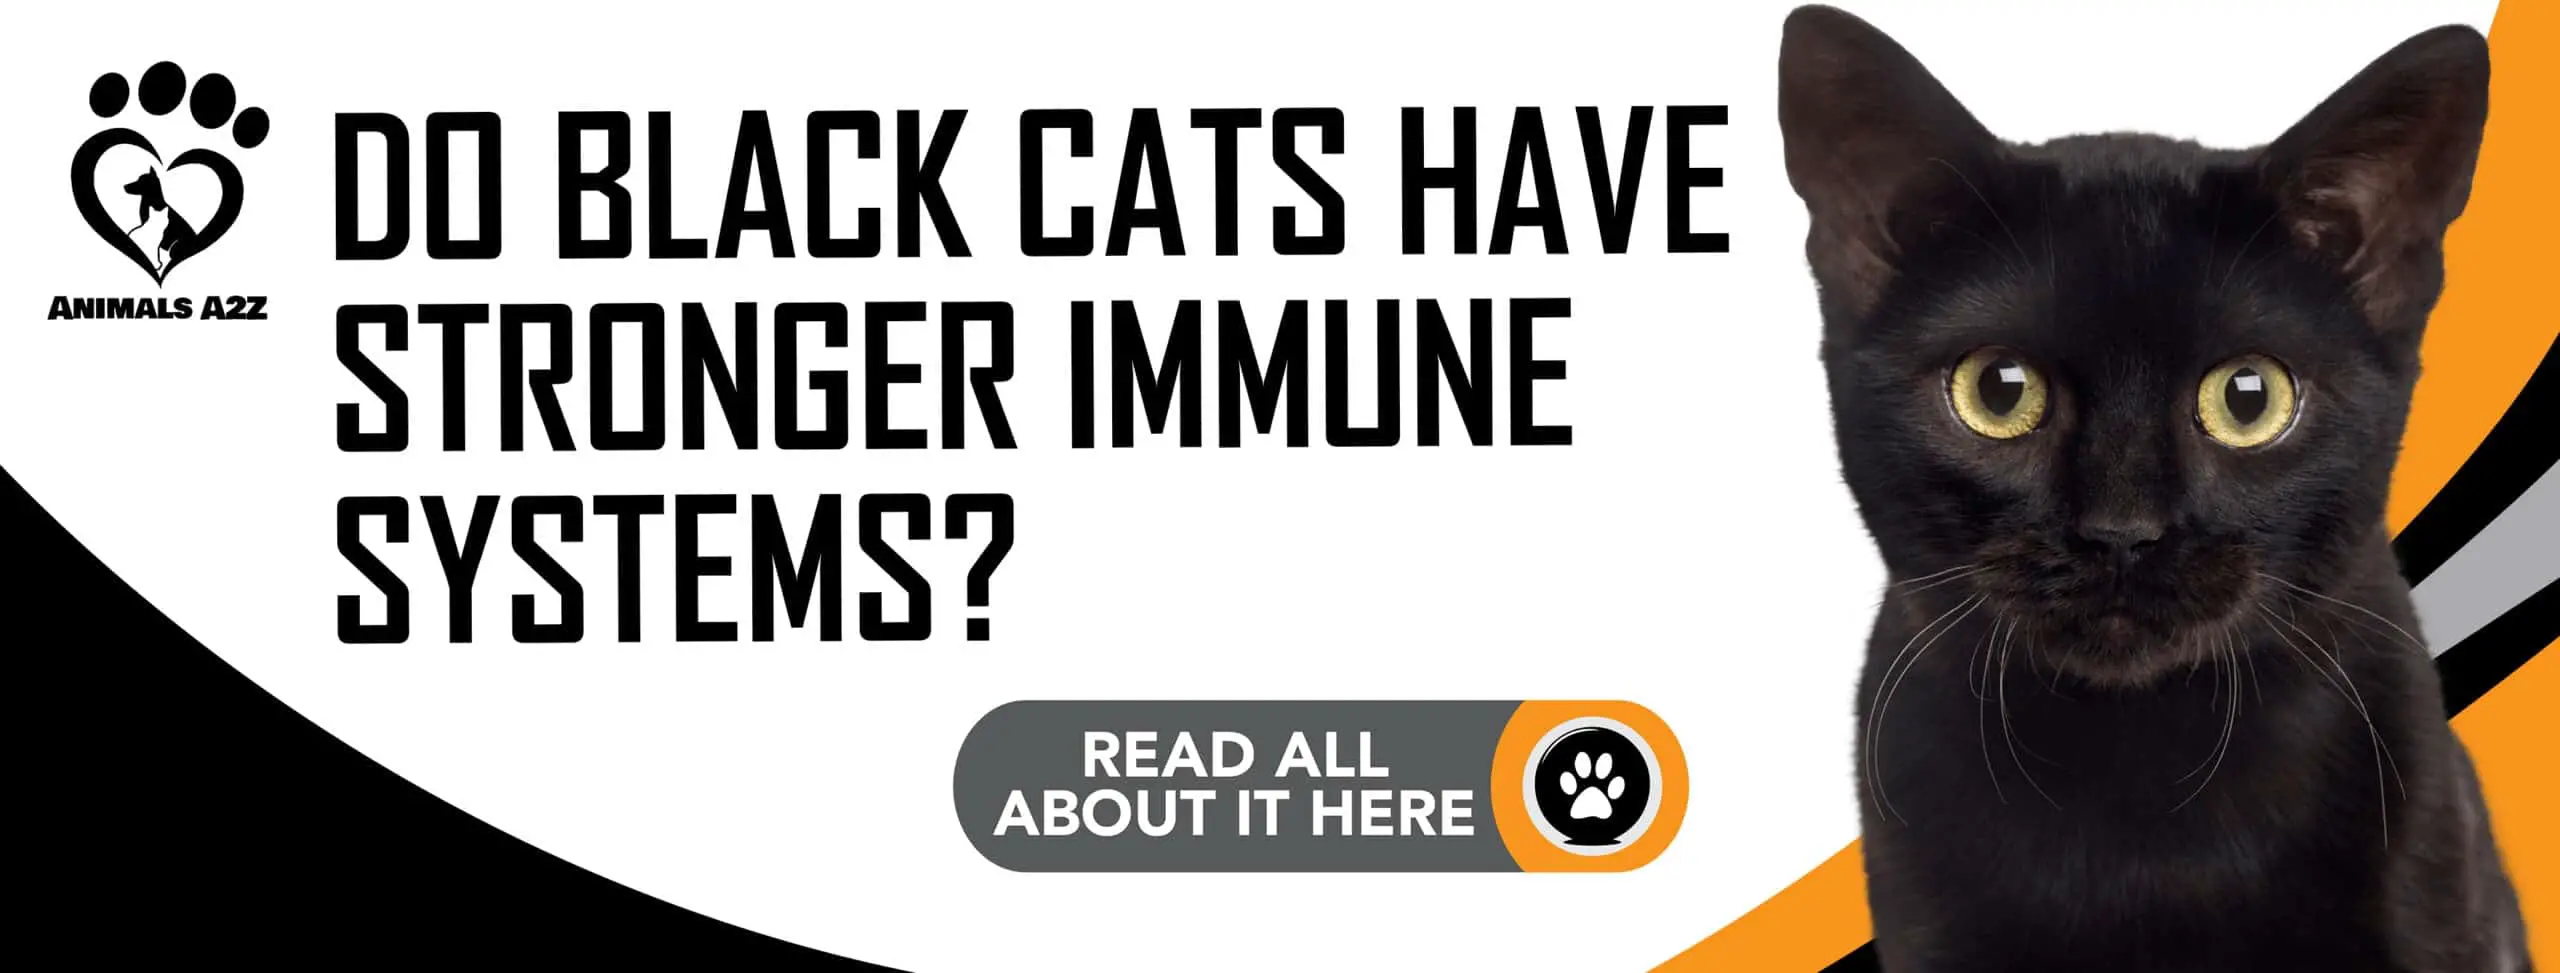 Do black cats have stronger immune systems